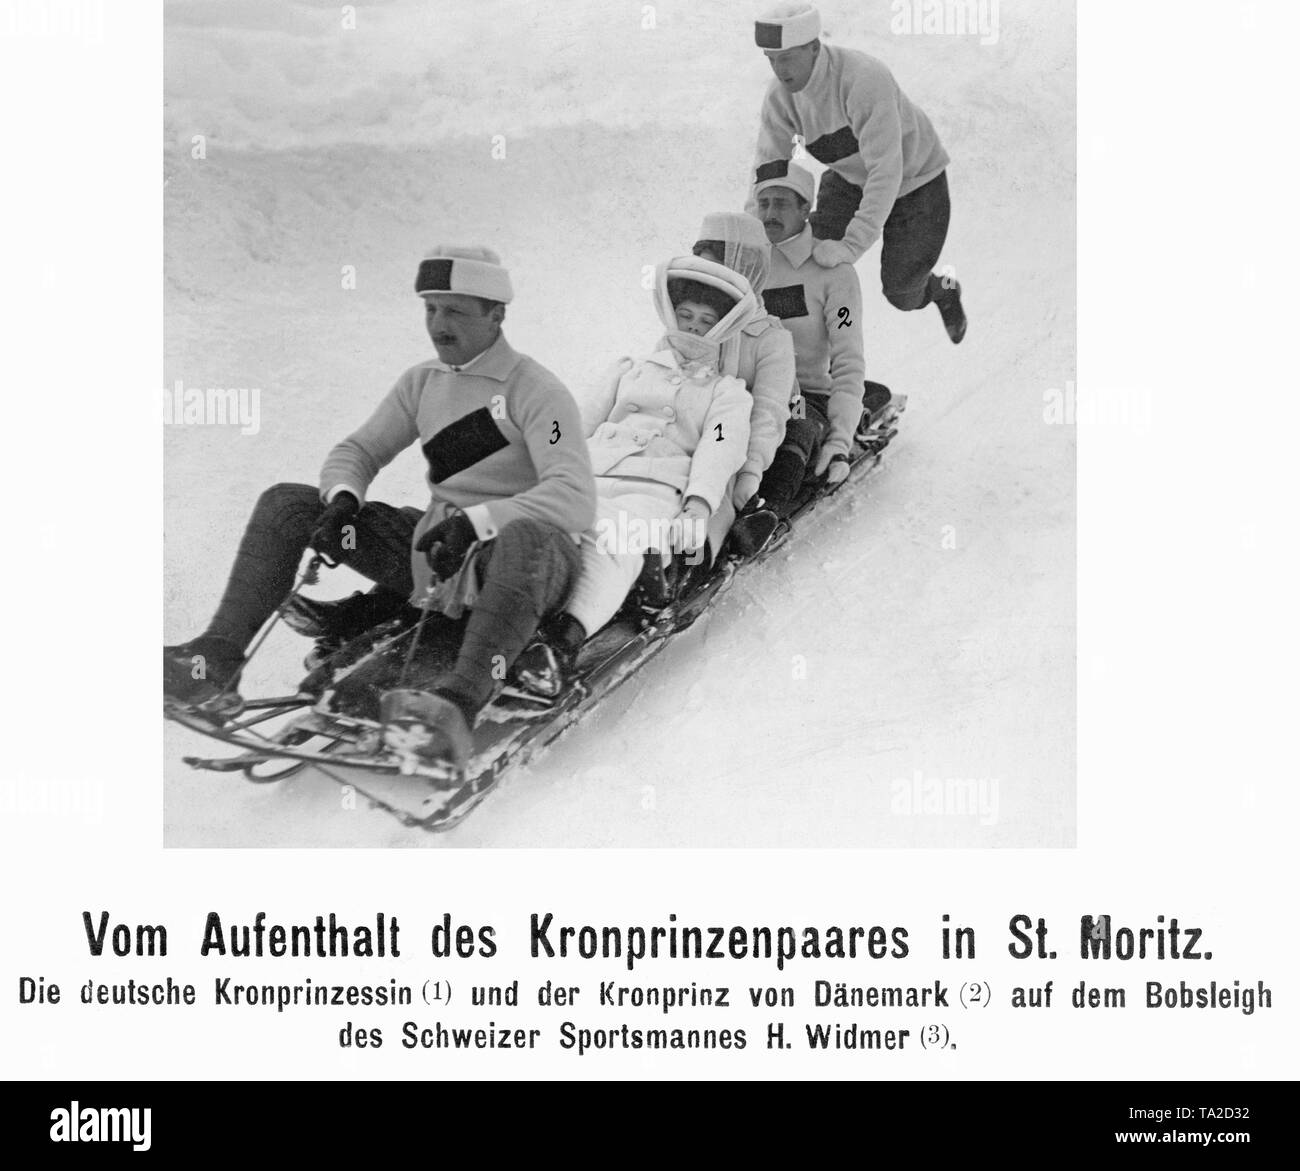 Crown Princess Cecilie, b. Duchess of Mecklenburg, bobsleighing with her family. From left: Mr. Widmer (Swiss athlete), Crown Princess Cecilie, her sister Crown Princess Alexandrine of Denmark (nee Duchess of Mecklenburg) with her husband Crown Prince Christian of Denmark. Stock Photo